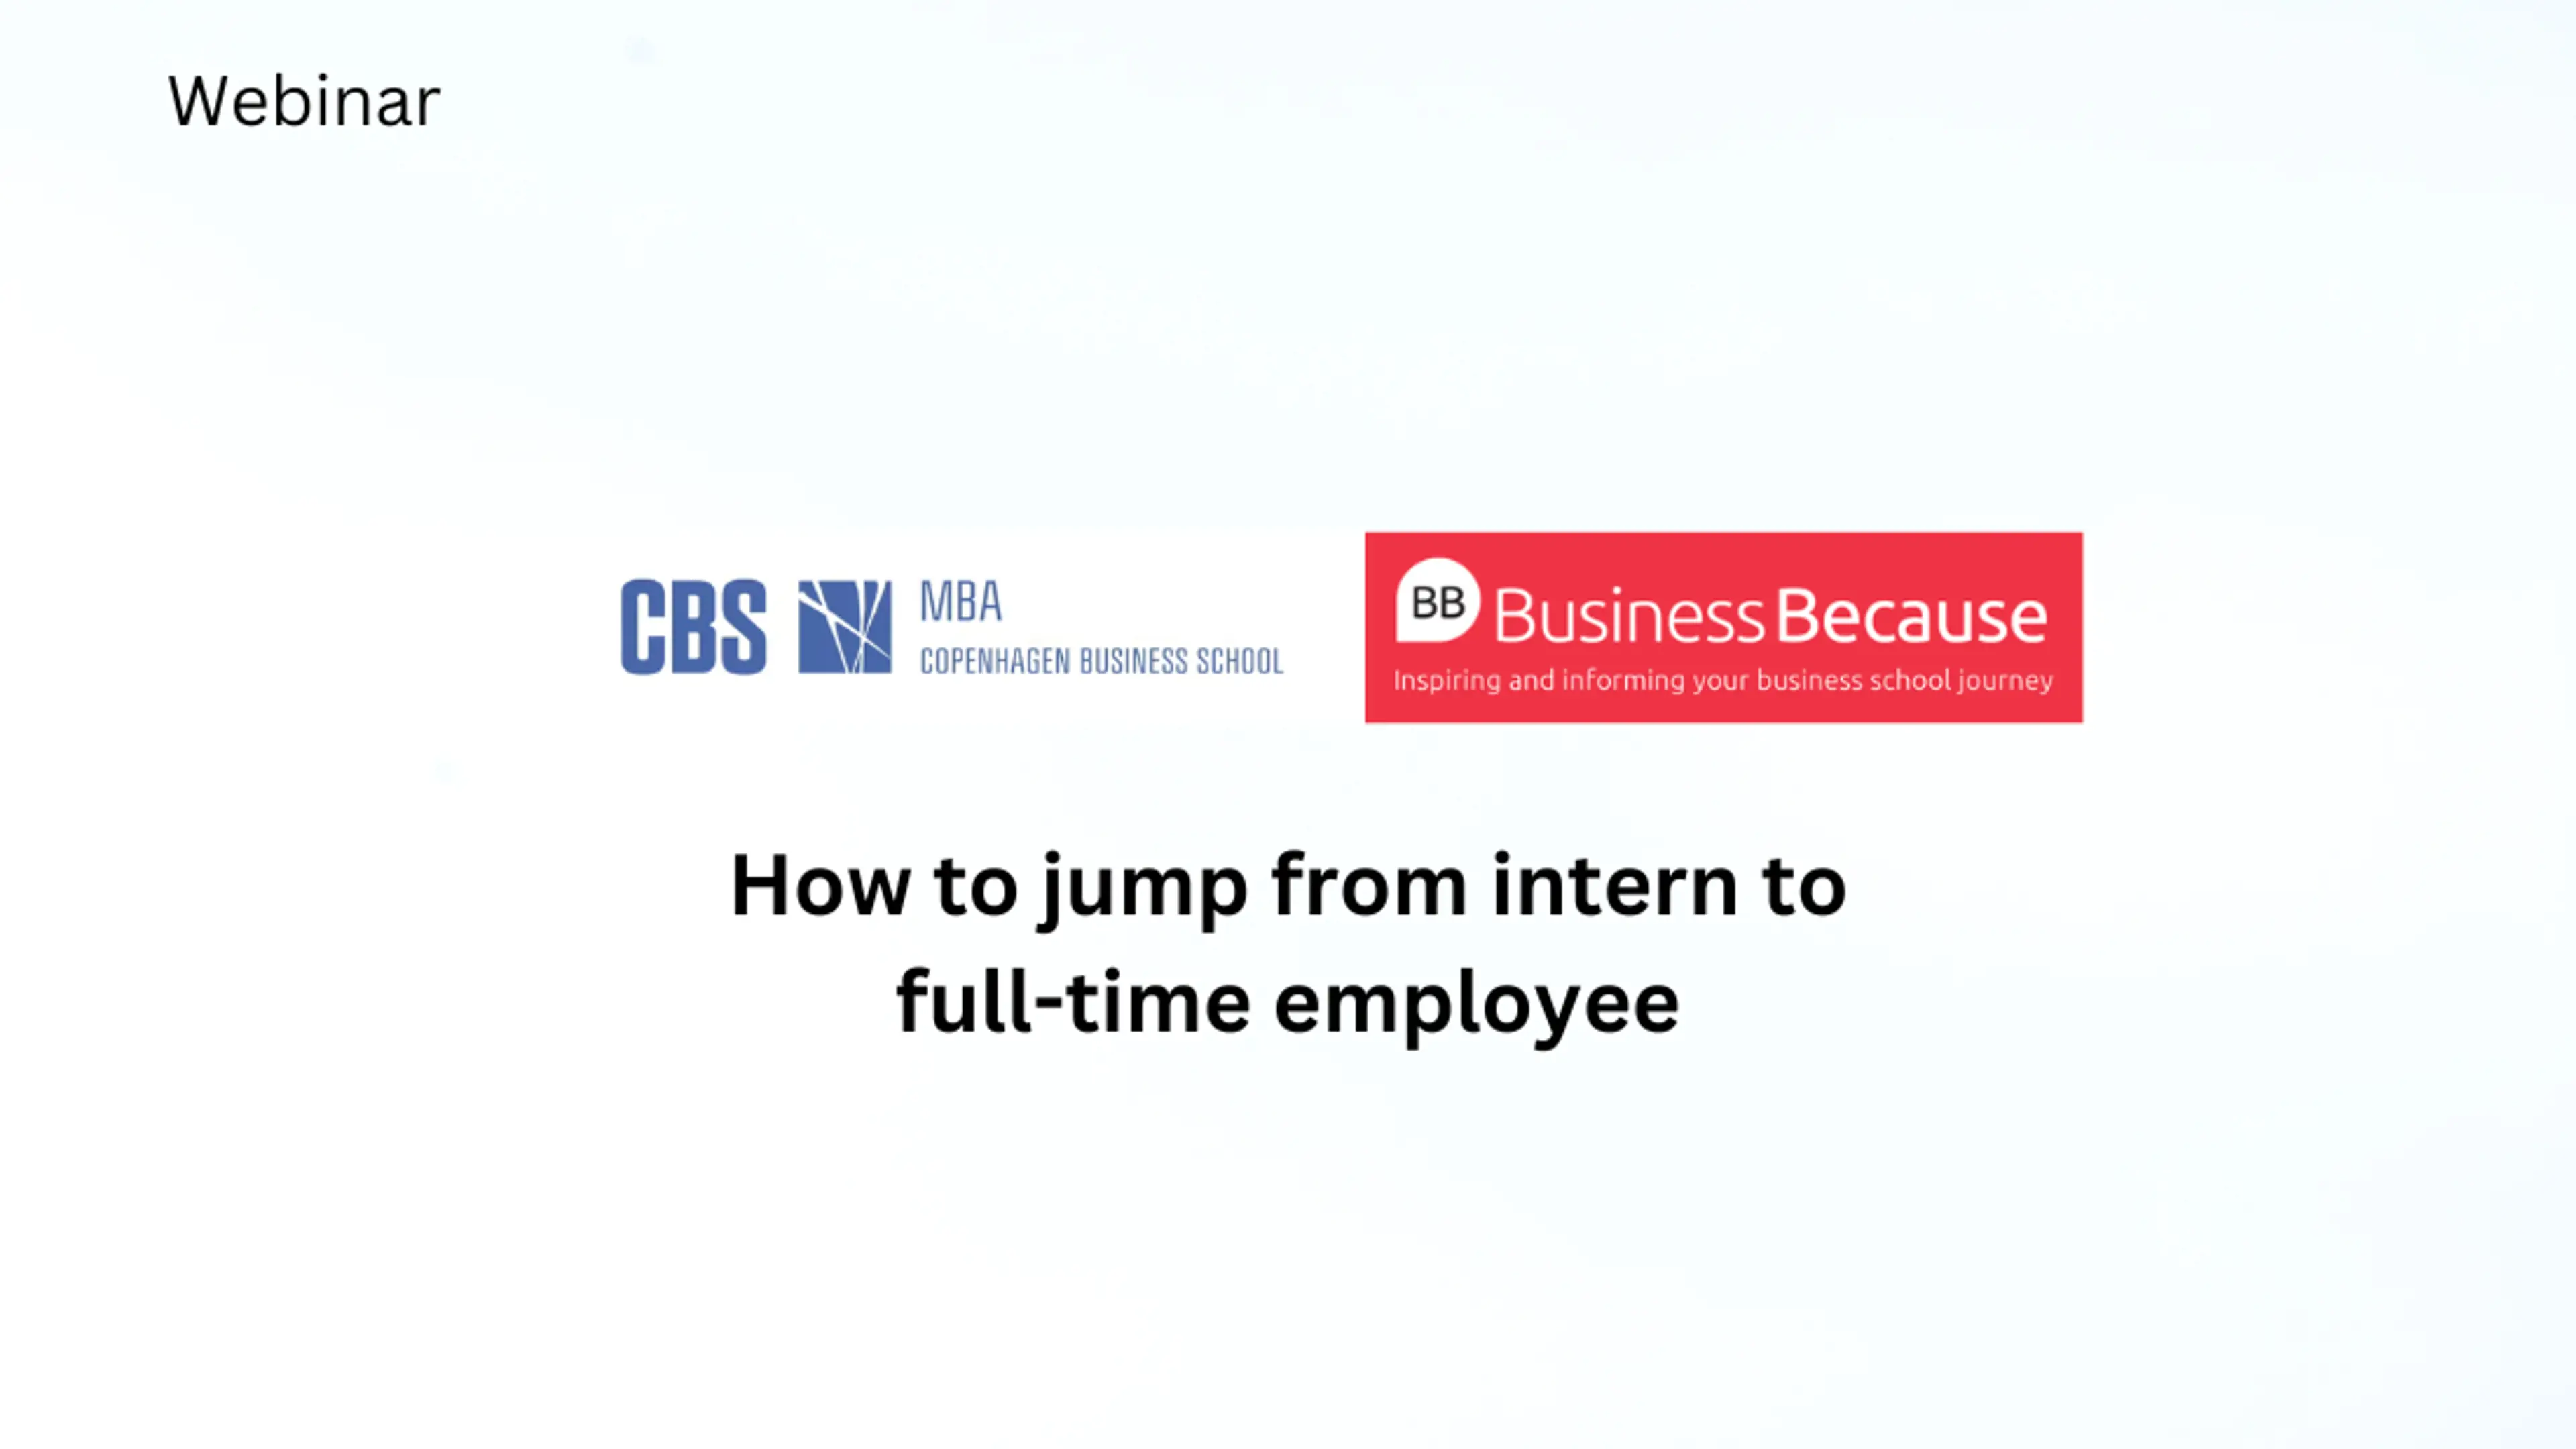 Picture of the CBS and Business Because logos and the title of the webinar, which is "How to jump from intern to full-time employee"